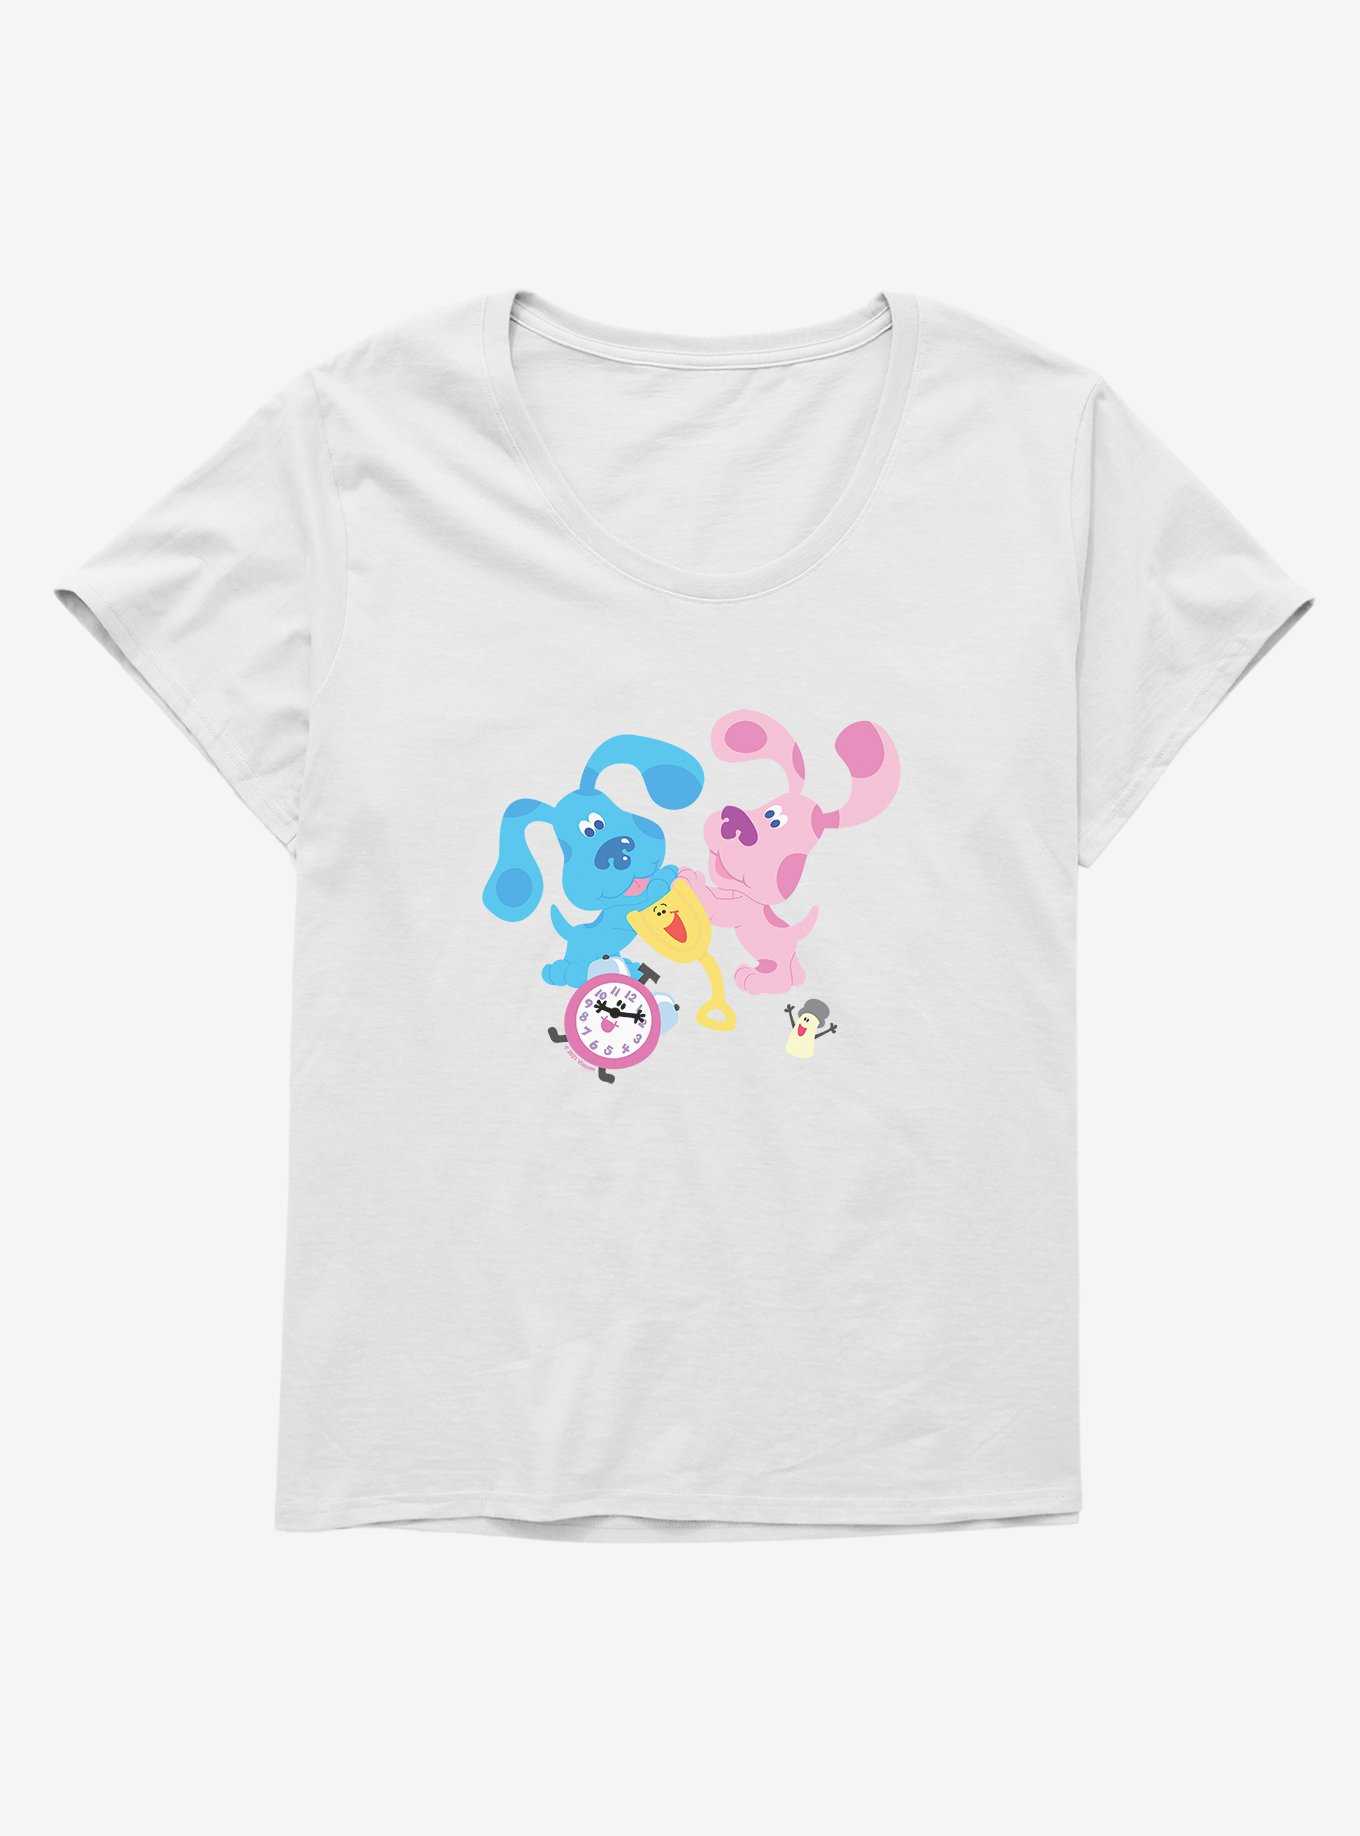 Blue's Clues Group Playtime Girls T-Shirt Plus Size, , hi-res